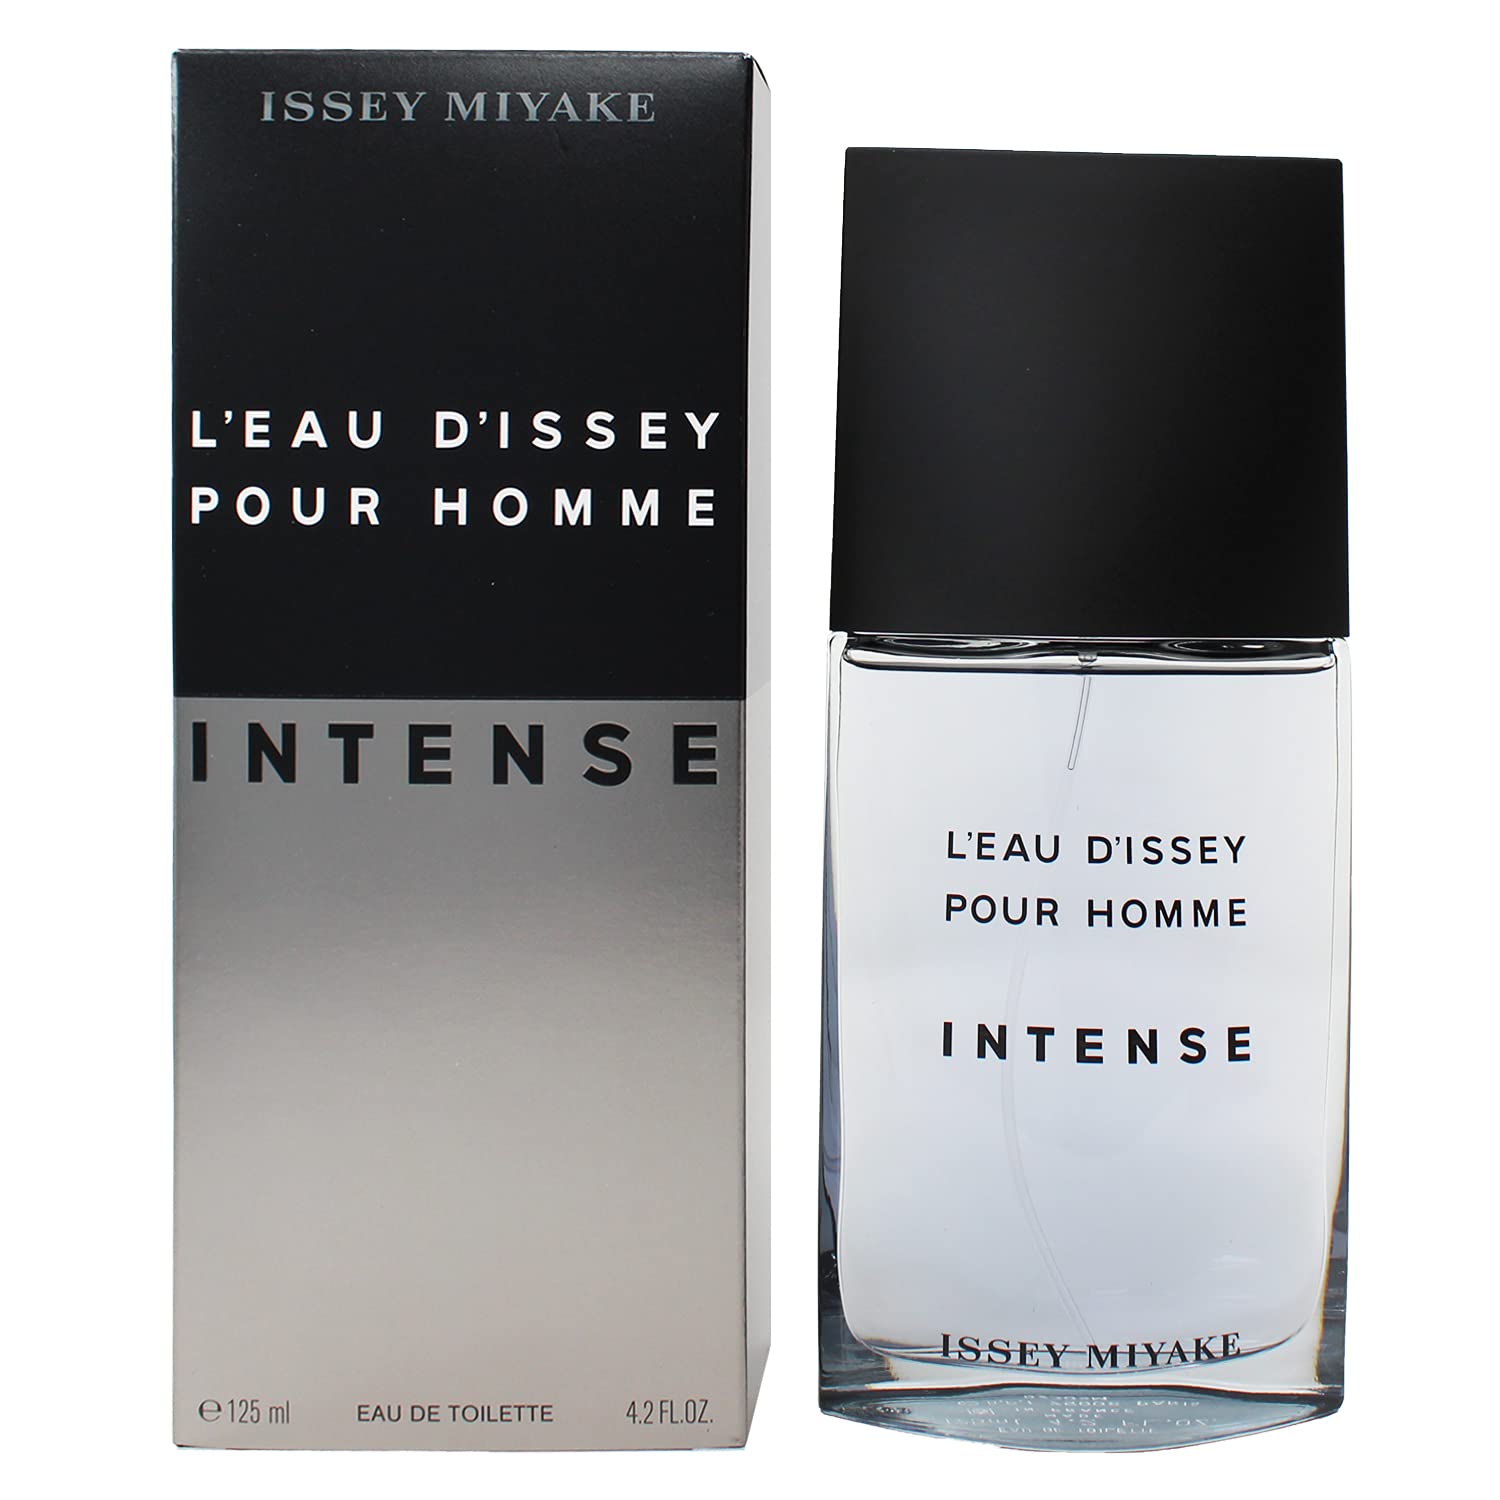 L'Eau d'Issey Pour Homme Intense by Issey Miyake 4.2 oz EDT Spray for Men